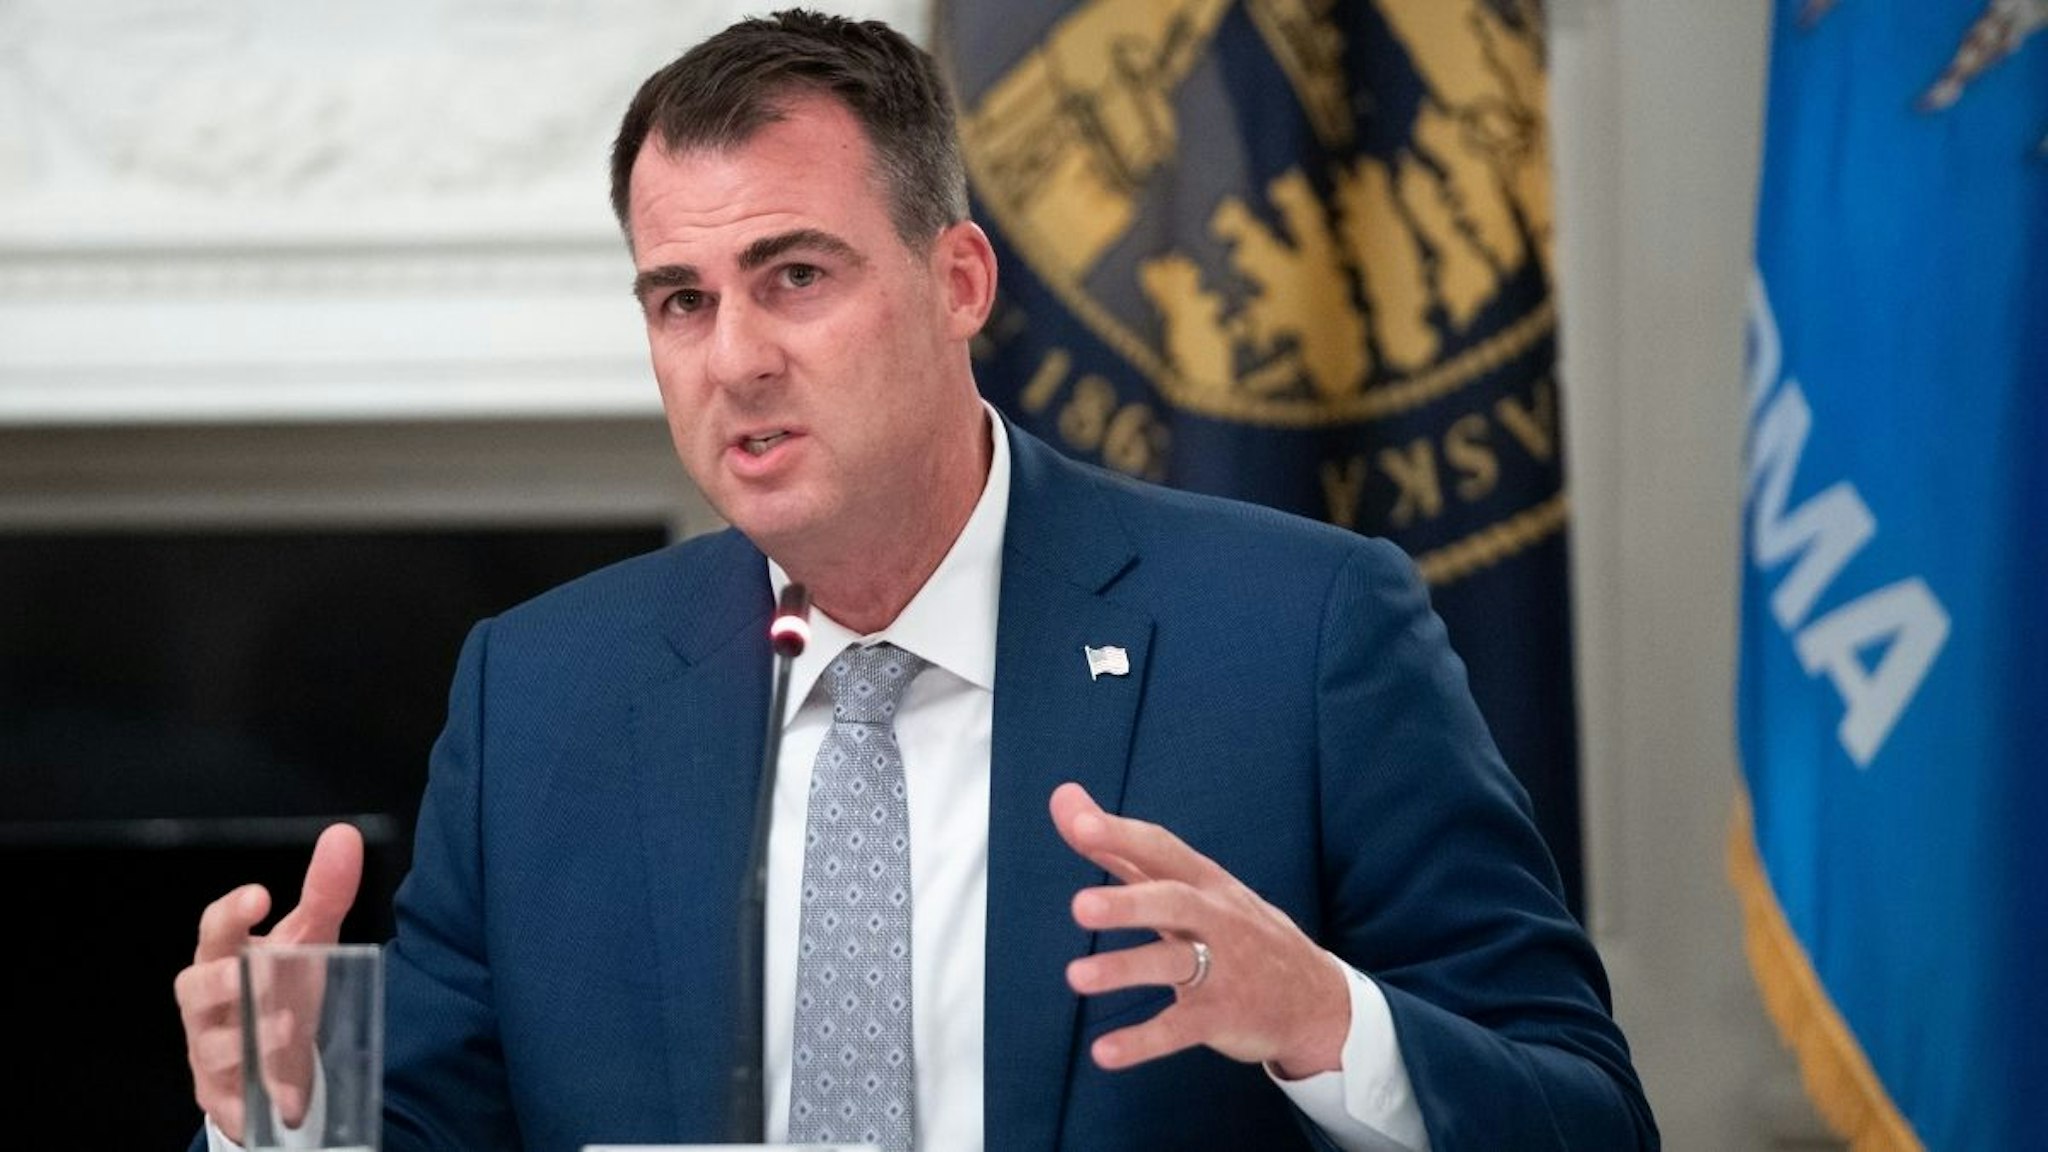 Oklahoma Governor Kevin Stitt speaks during a roundtable discussion with US President Donald Trump about economic reopening of closures due to COVID-19, known as coronavirus, in the State Dining Room of the White House in Washington, DC, June 18, 2020.